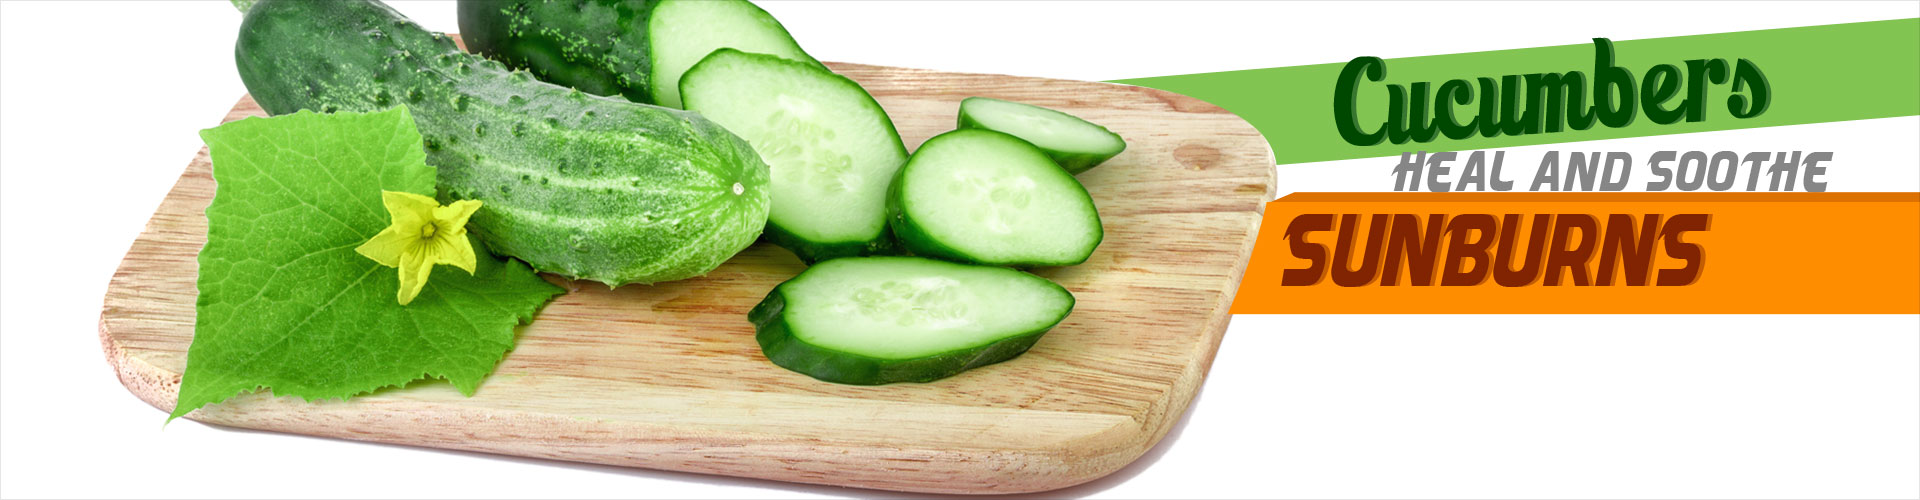 Cucumbers Heal And Soothe Sunburns